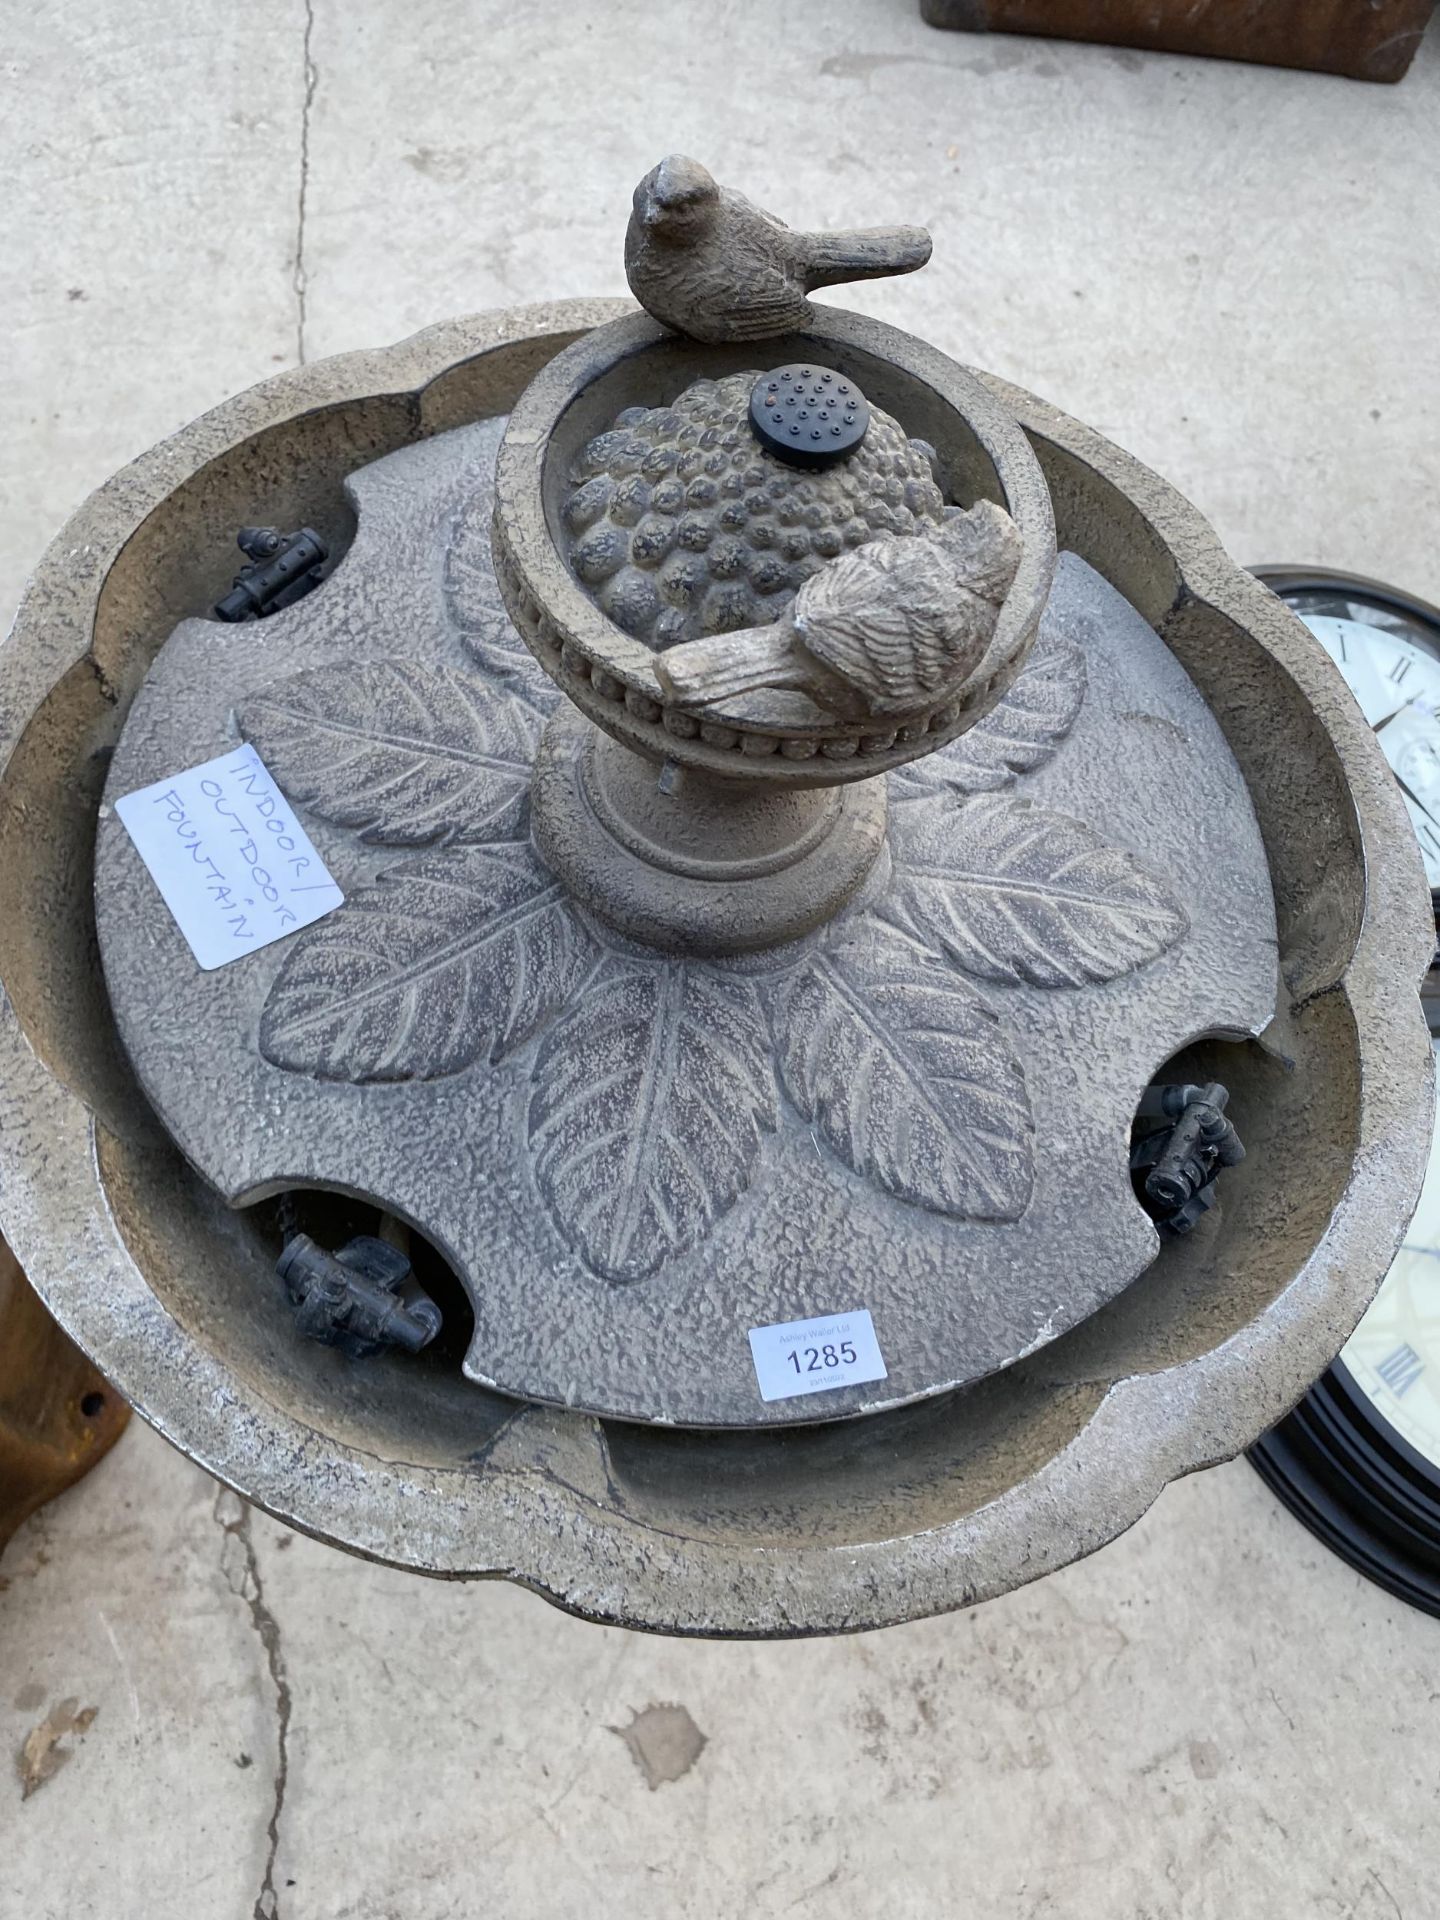 A PLASTIC INDOOR OR OUTDOOR WATER FOUNTAIN WITH SMALL BIRD DECORATION - Image 2 of 5